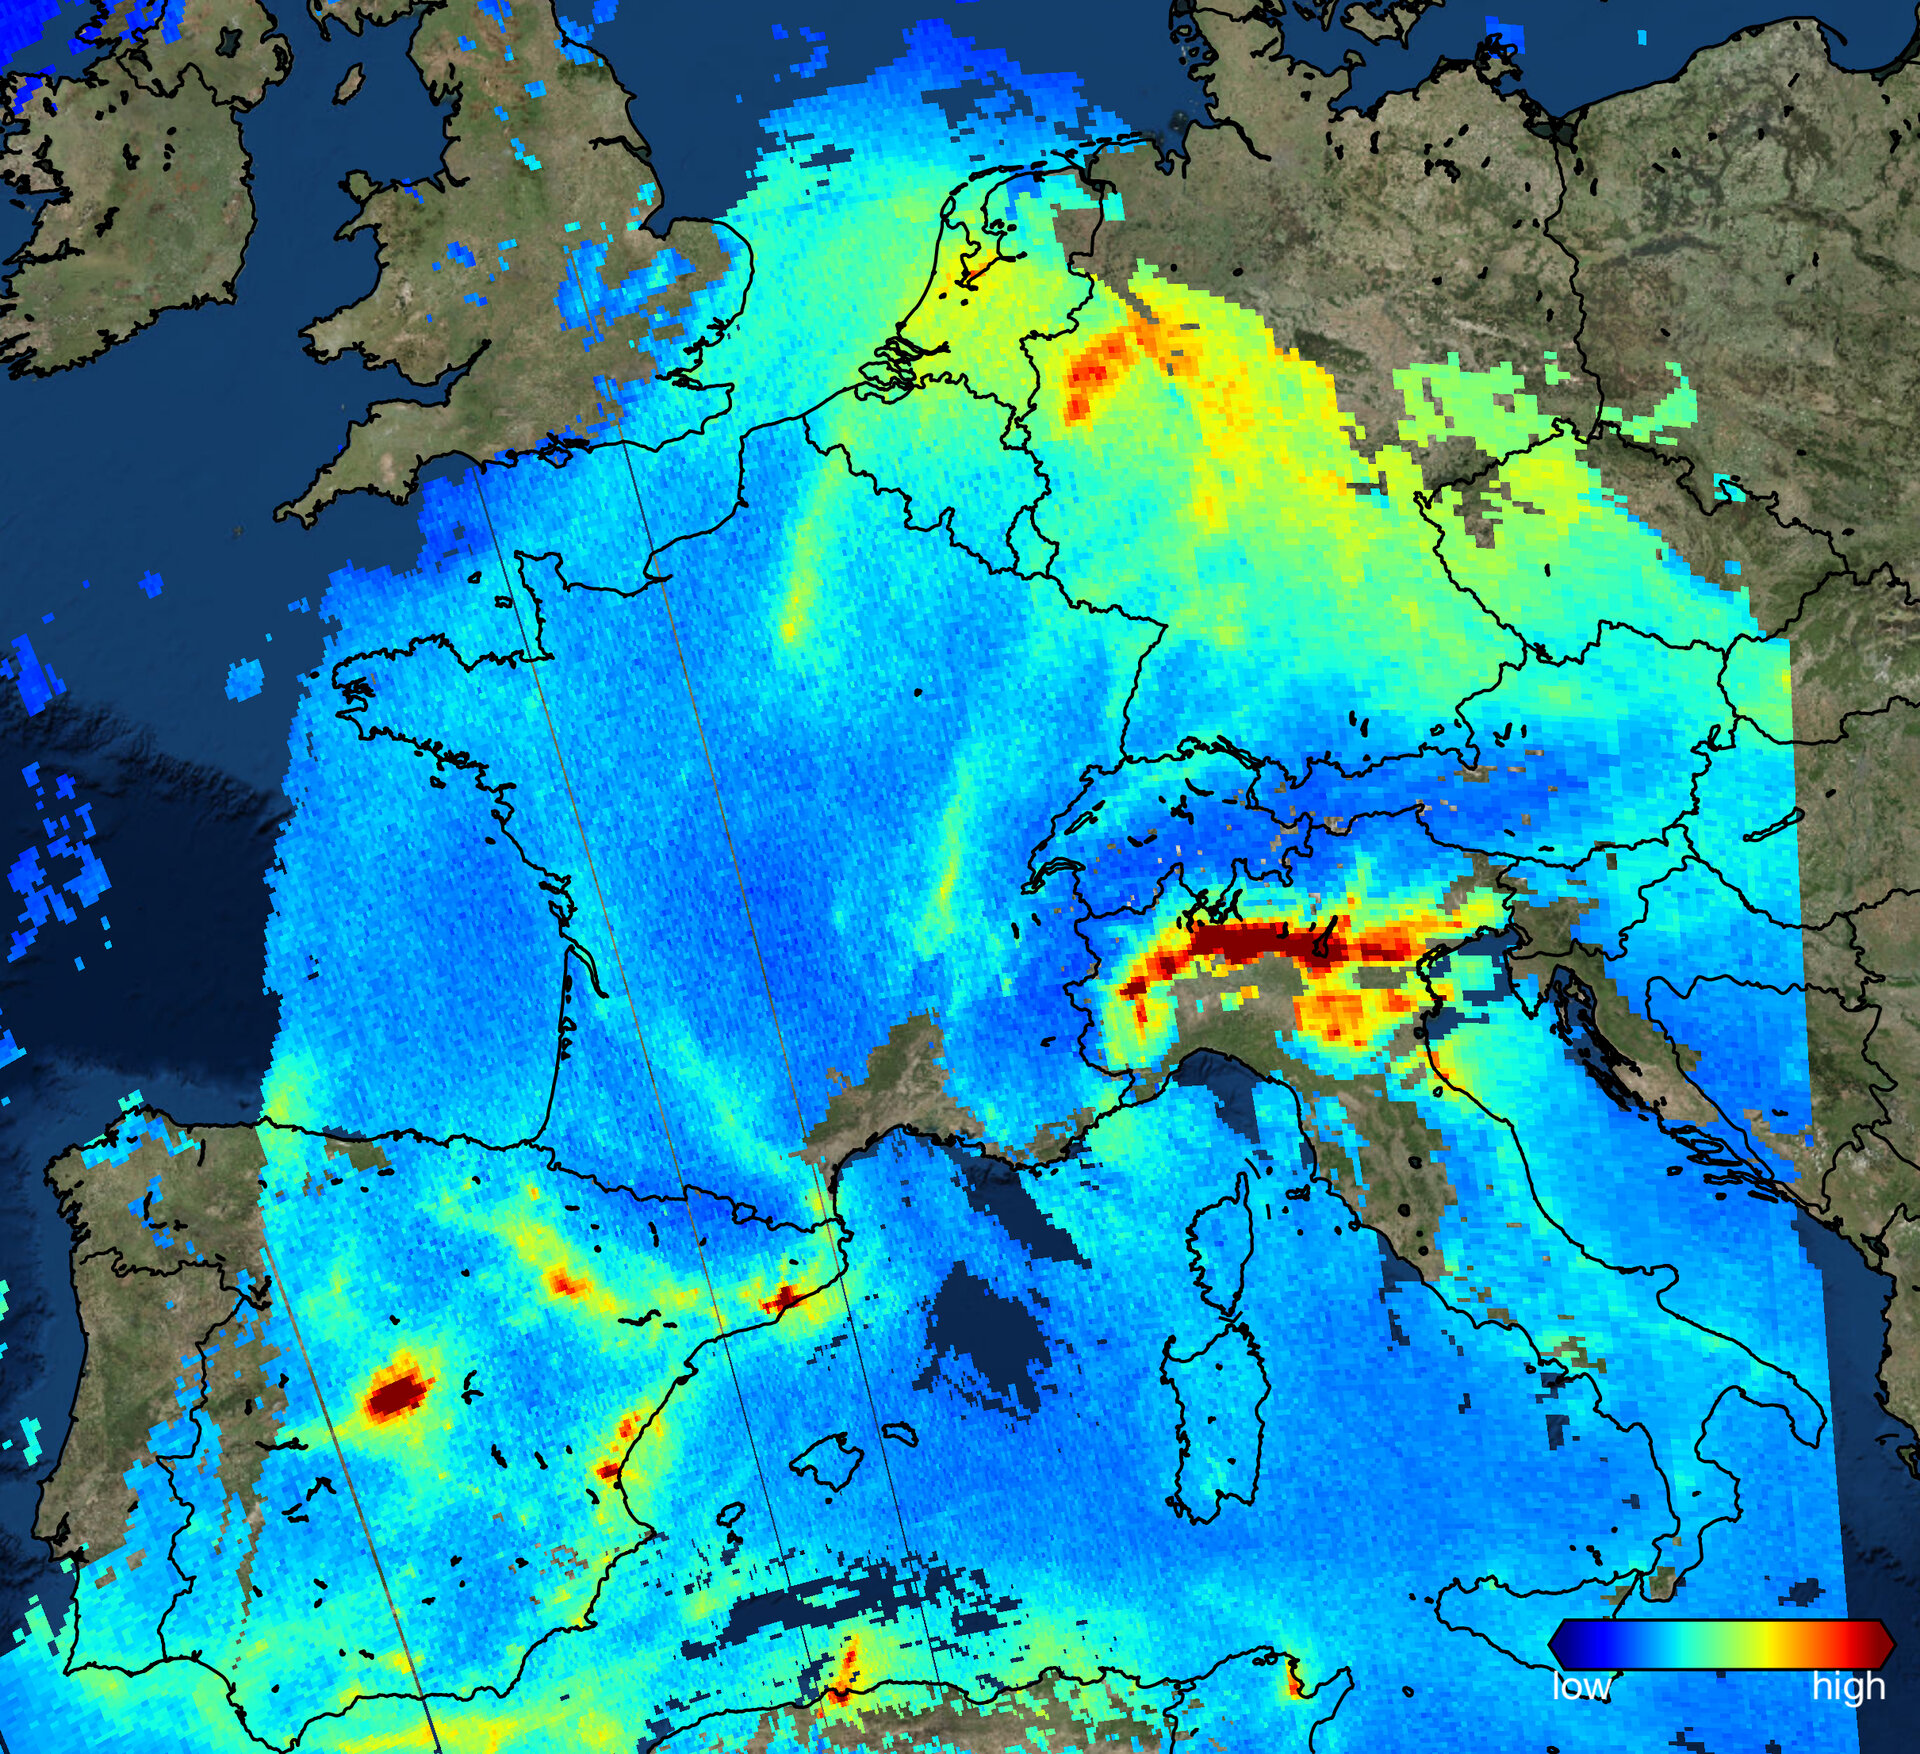 Sentinel-5P created this map of air pollution levels over Europe